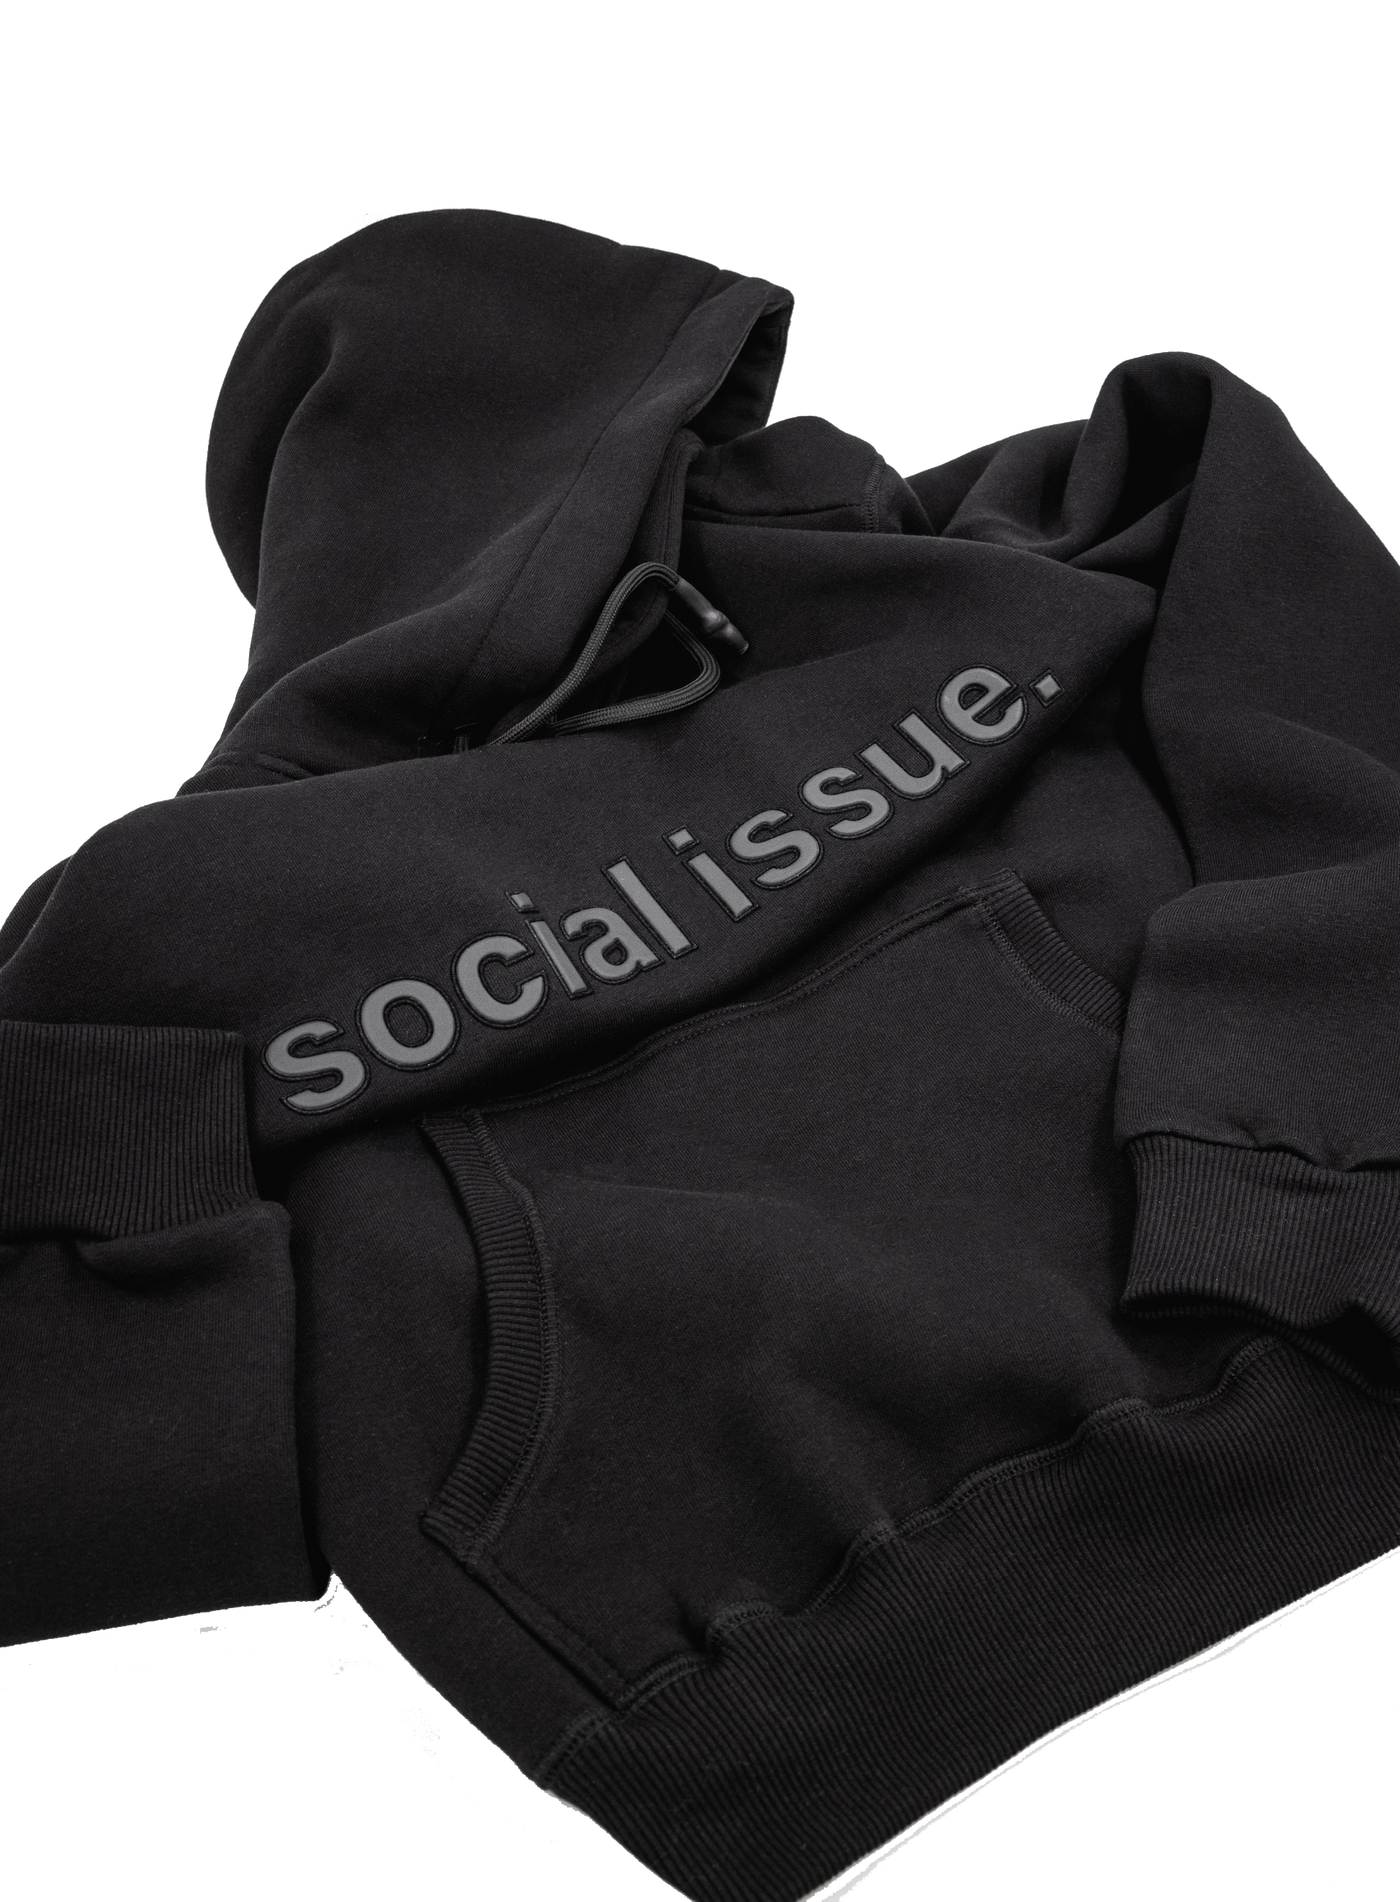 "What is your social issue?" - Hoodie